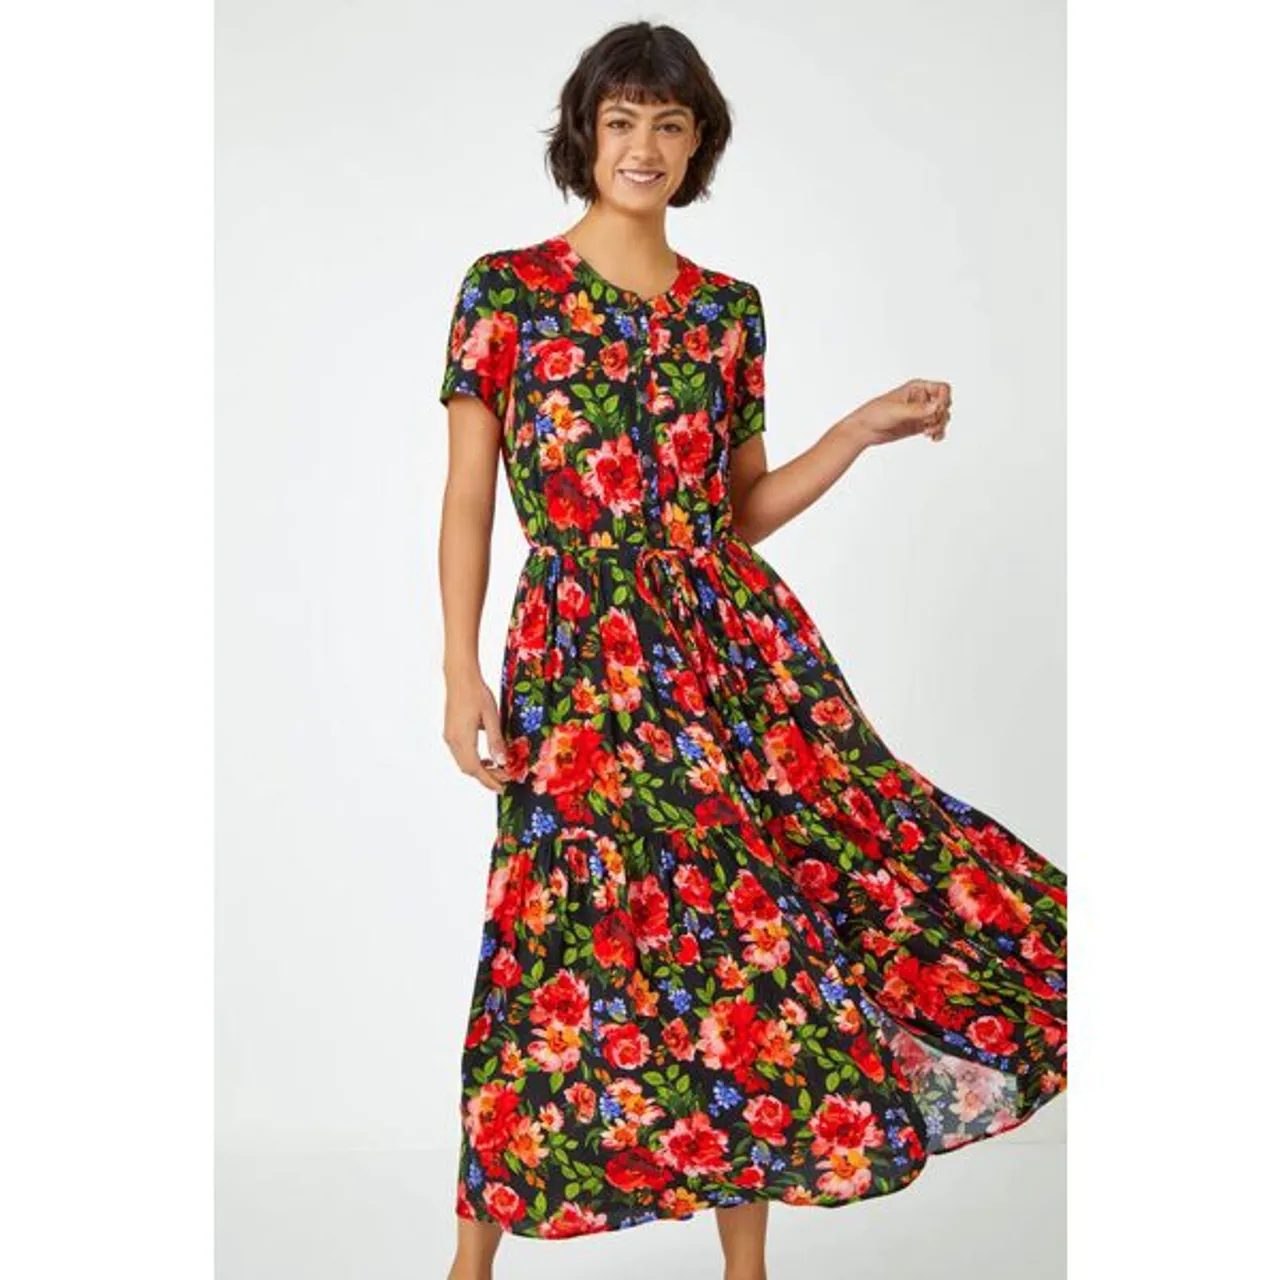 Roman Floral Print Tiered Midi Dress in Red - Size 10 10 female